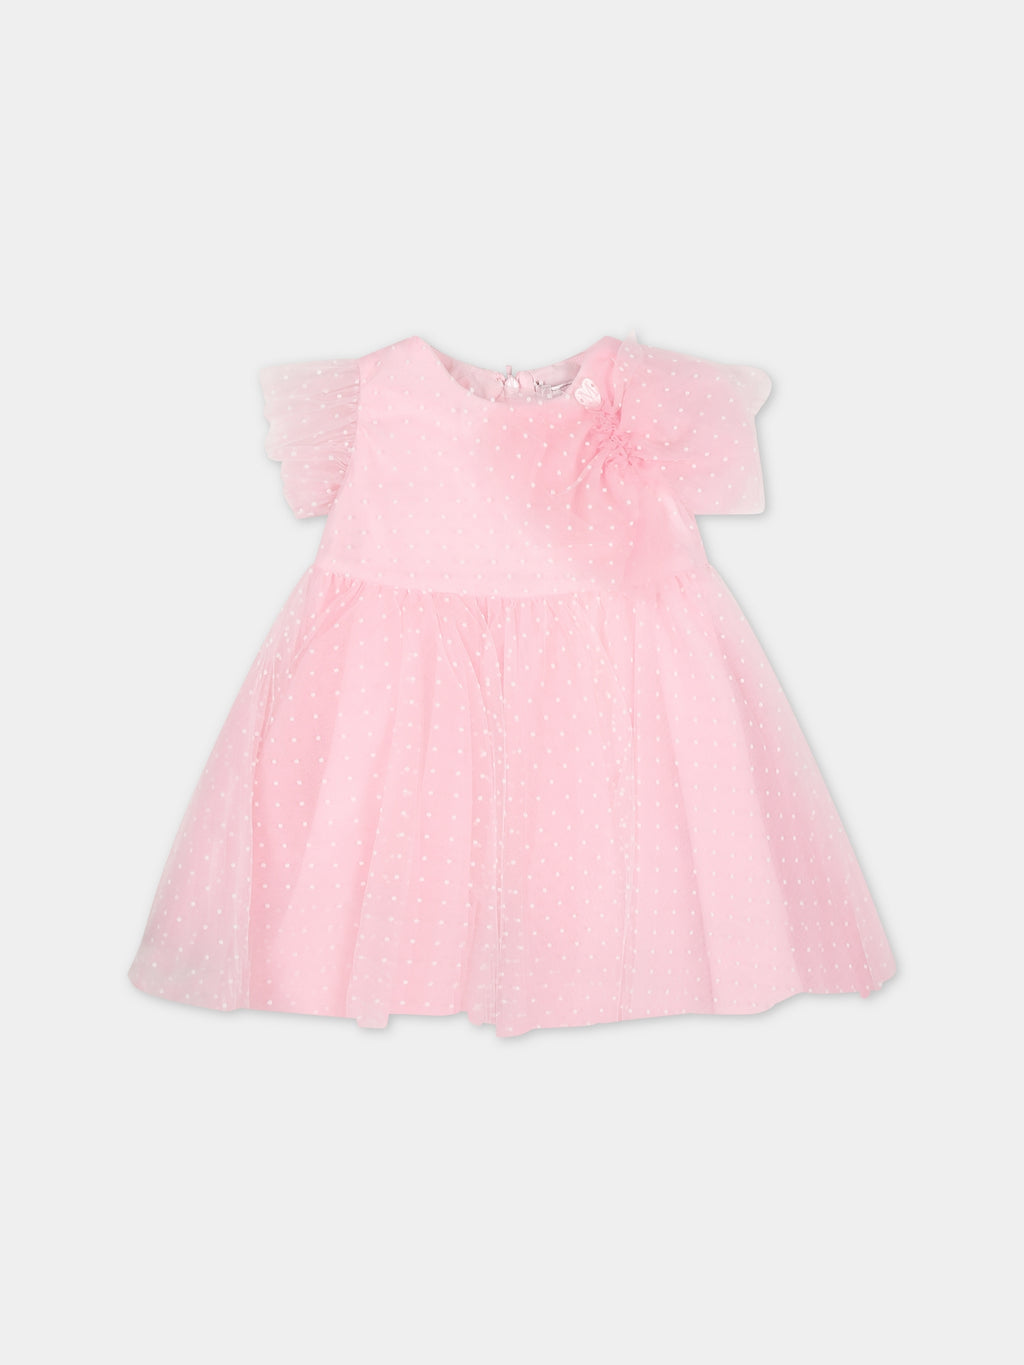 Pink dress for baby girl with polka dots